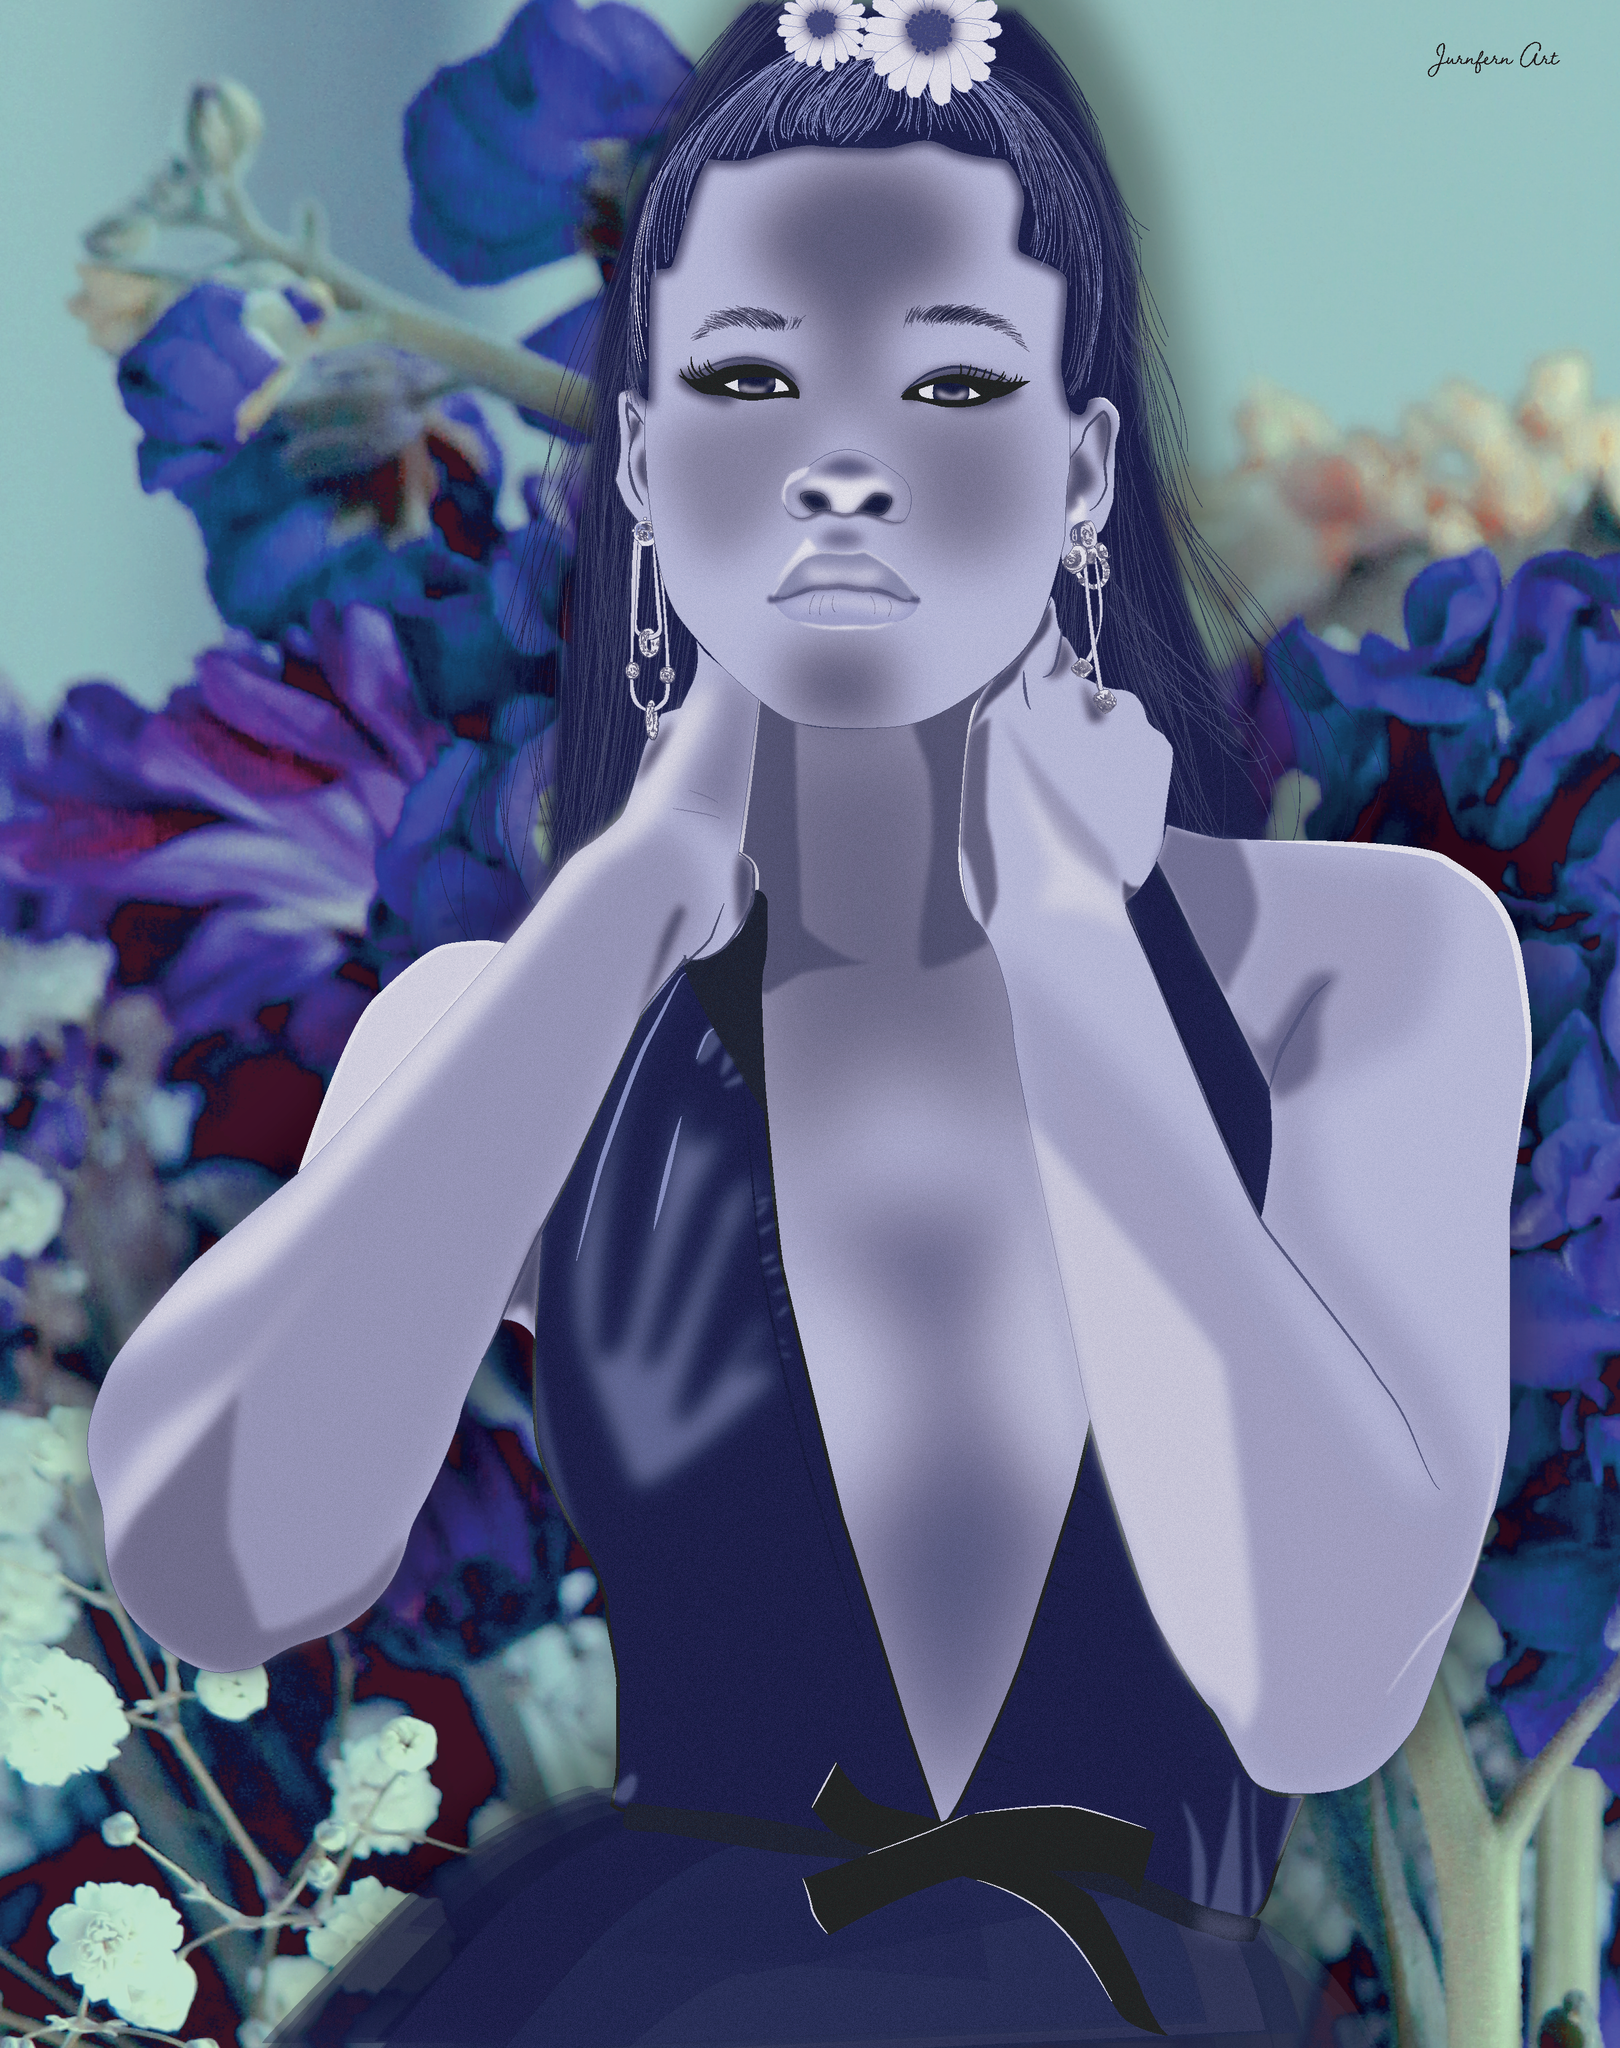 A digital illustration print of actress Storm Reid posing in a dark blue V-neck dress with daisies in her hair, and a blue and purple floral background